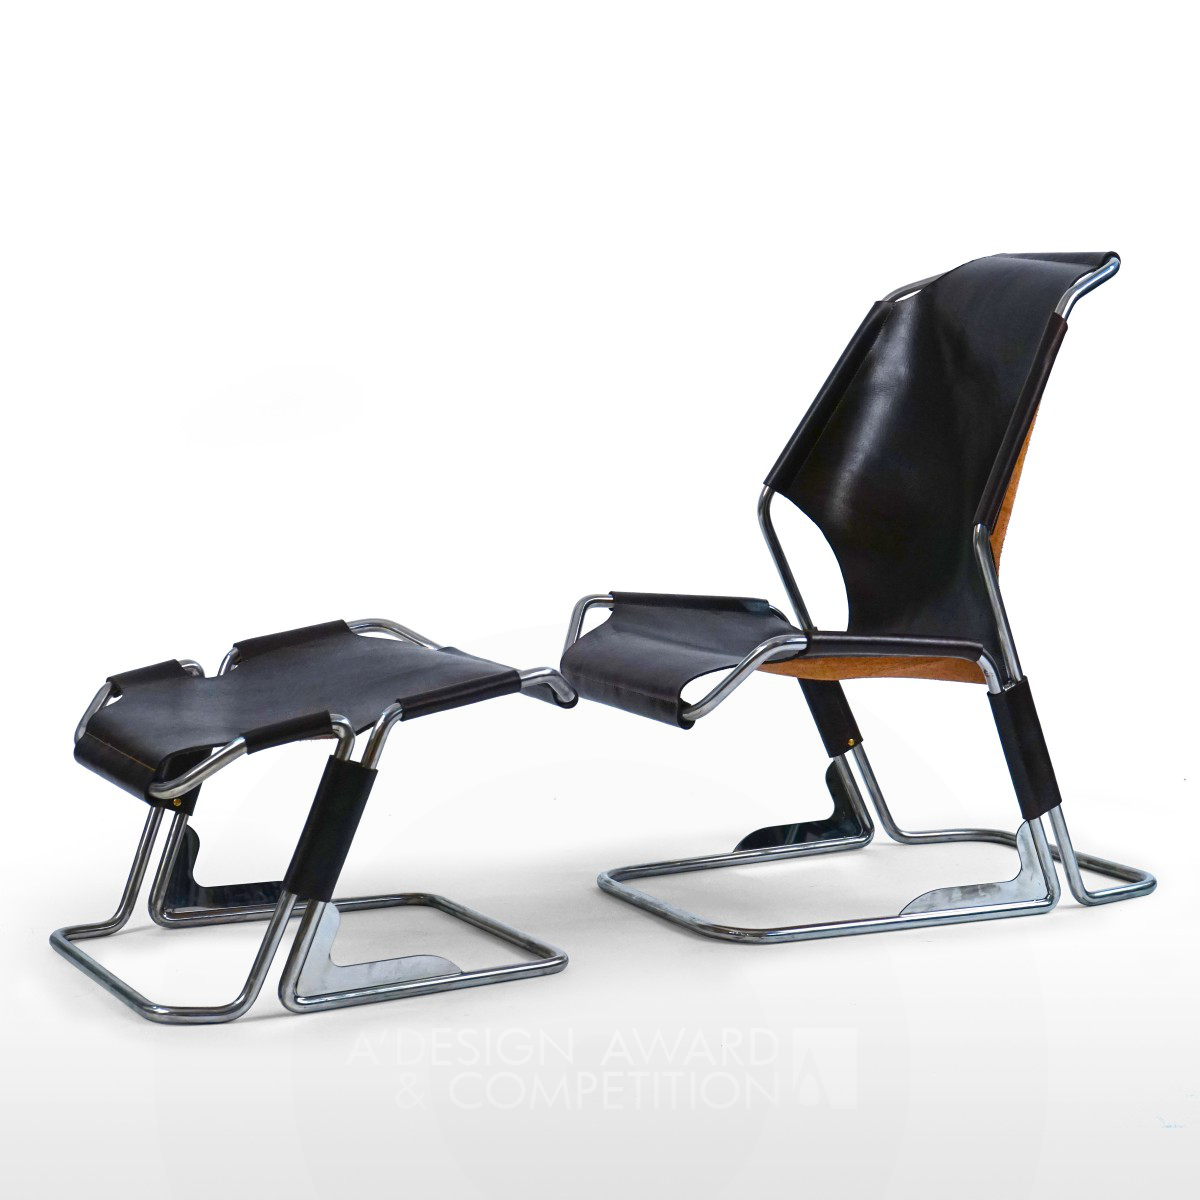 Qi Leisure Chair Comfortable To Use by Wei Jingye and Cui Yueming Iron Furniture Design Award Winner 2020 